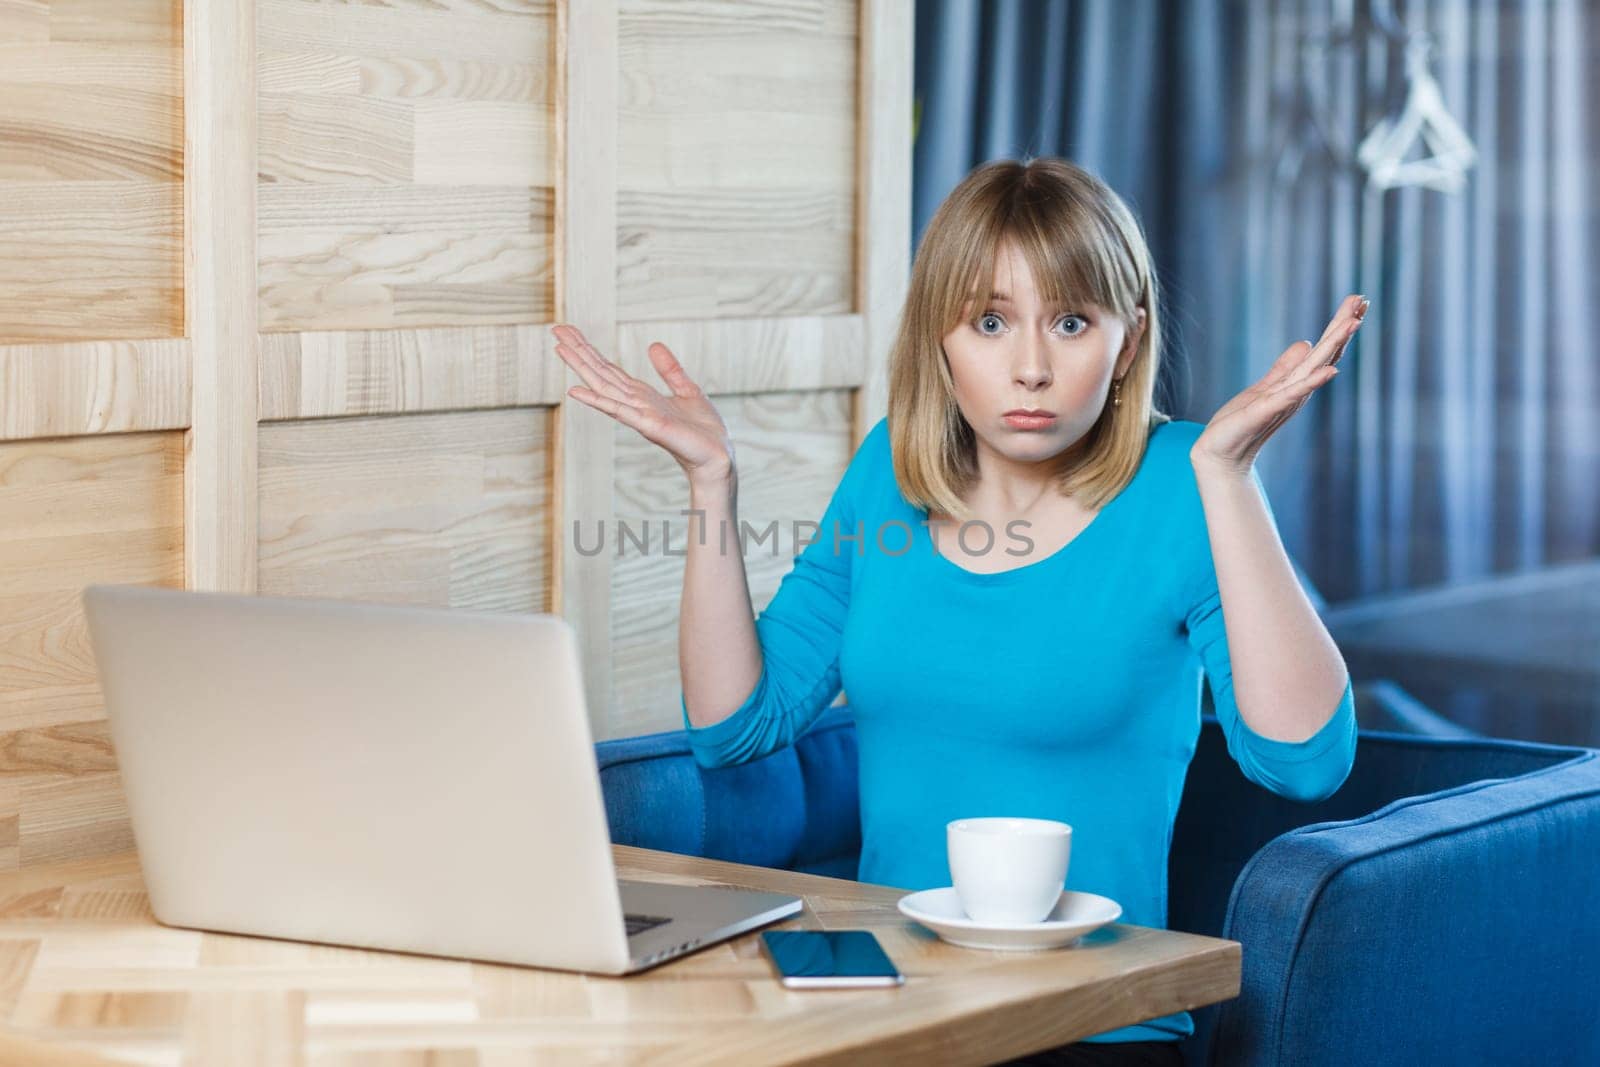 Confused uncertain young woman with blonde hair in blue shirt sitting at table and working on laptop, shrugging shoulders, looking at camera with puzzled face. Indoor shot, cafe background.